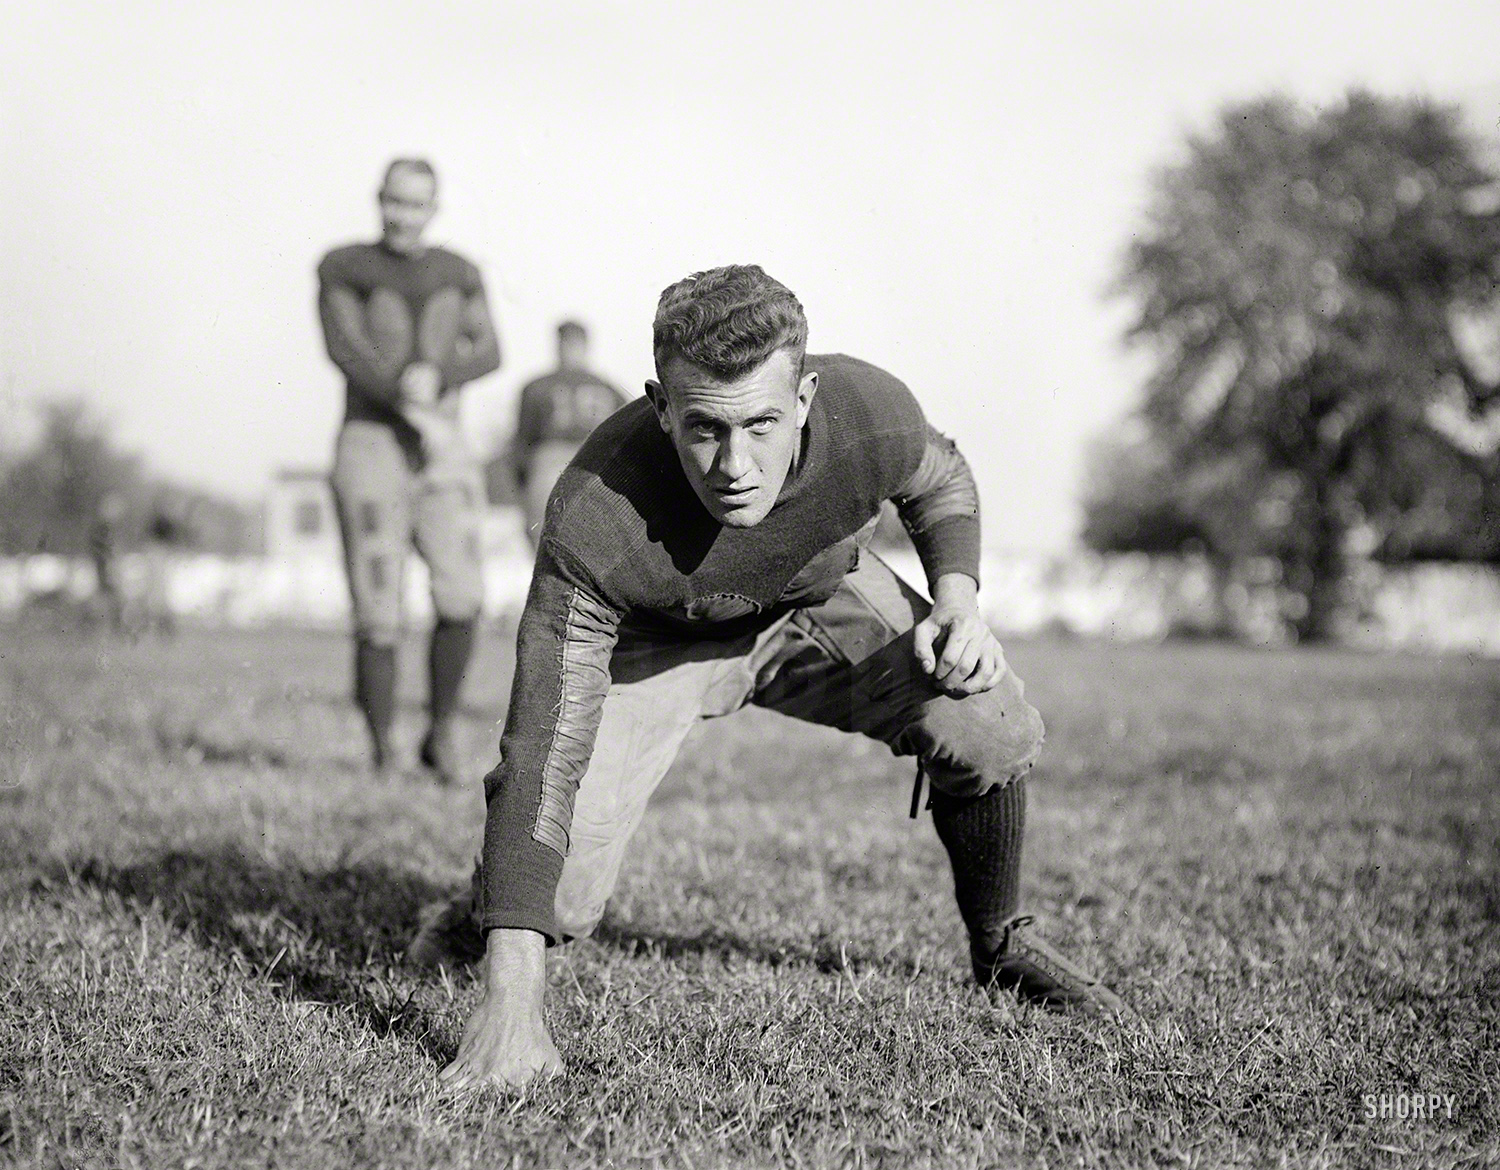 Washington, D.C., 1922. "Football" is all it says here, so we're calling an incom&shy;plete until someone comes up with a name. 5x7 glass negative. View full size.